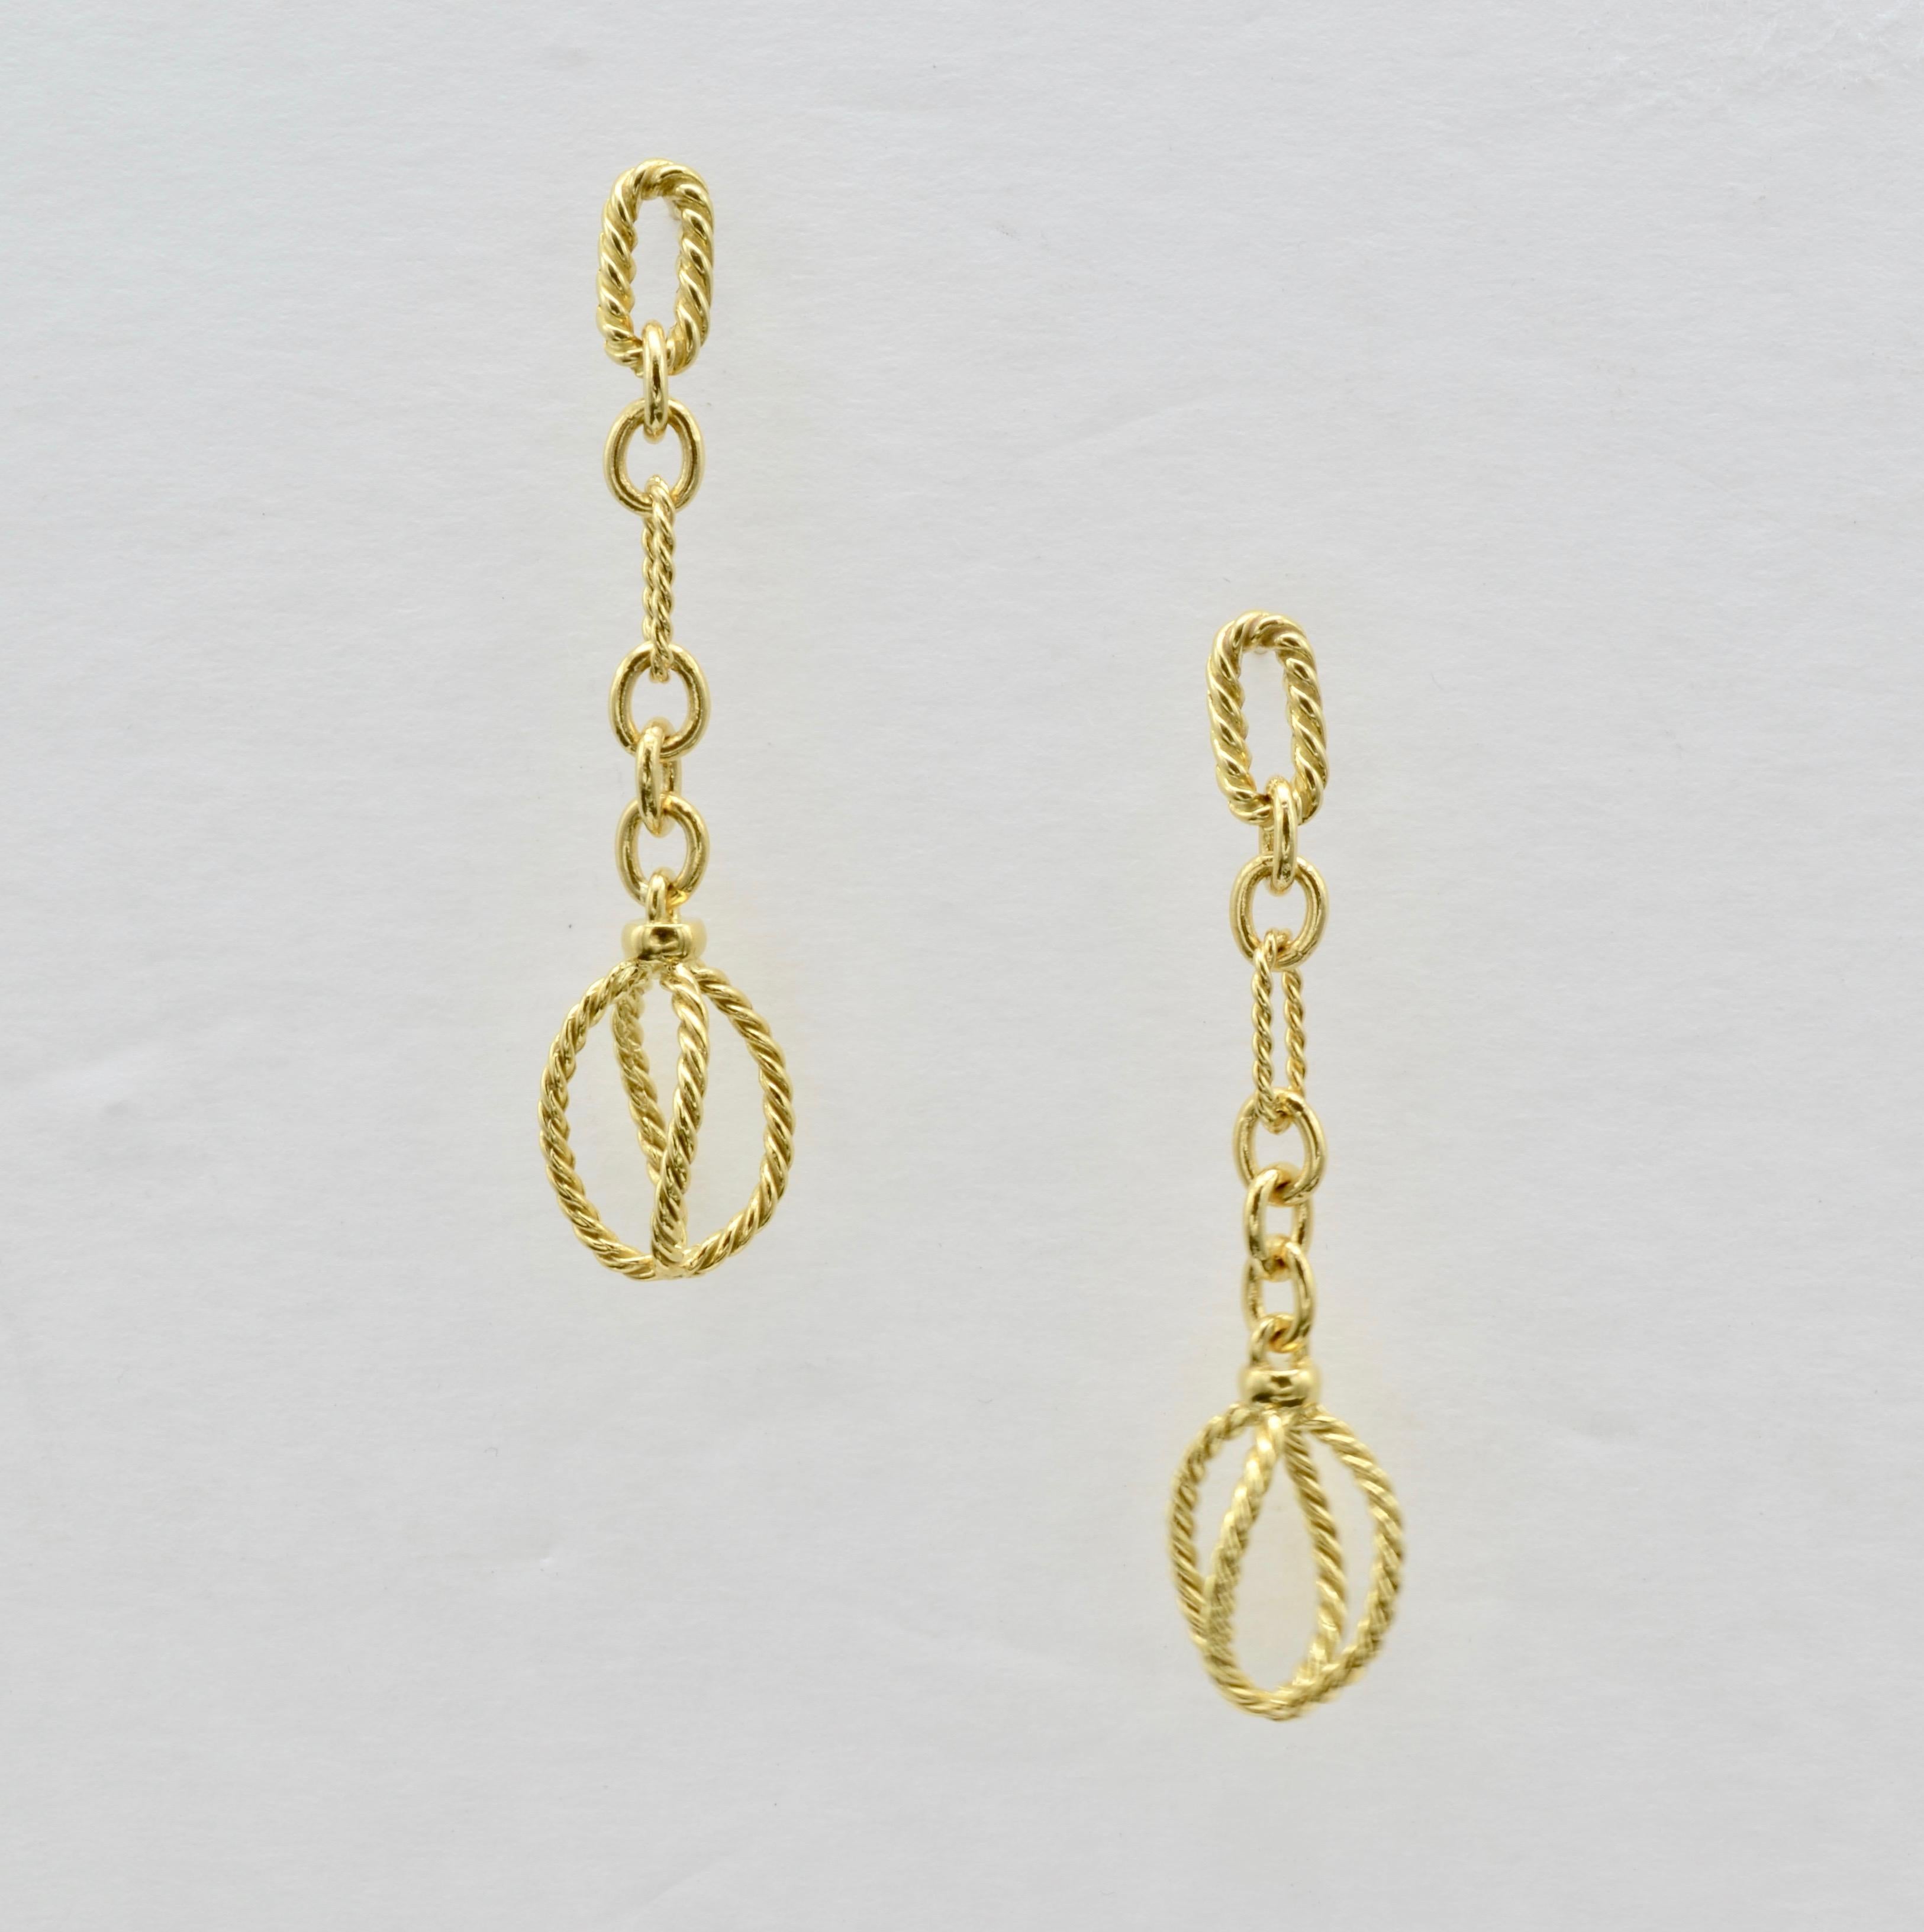 Dangling twisted chains of solid gold 18K yellow gold hang with a cage-like bearing on the bottom. Alternating textures of high polished loops create an elegant look that can easily be dressed up or dressed down. A high fashion staple for every